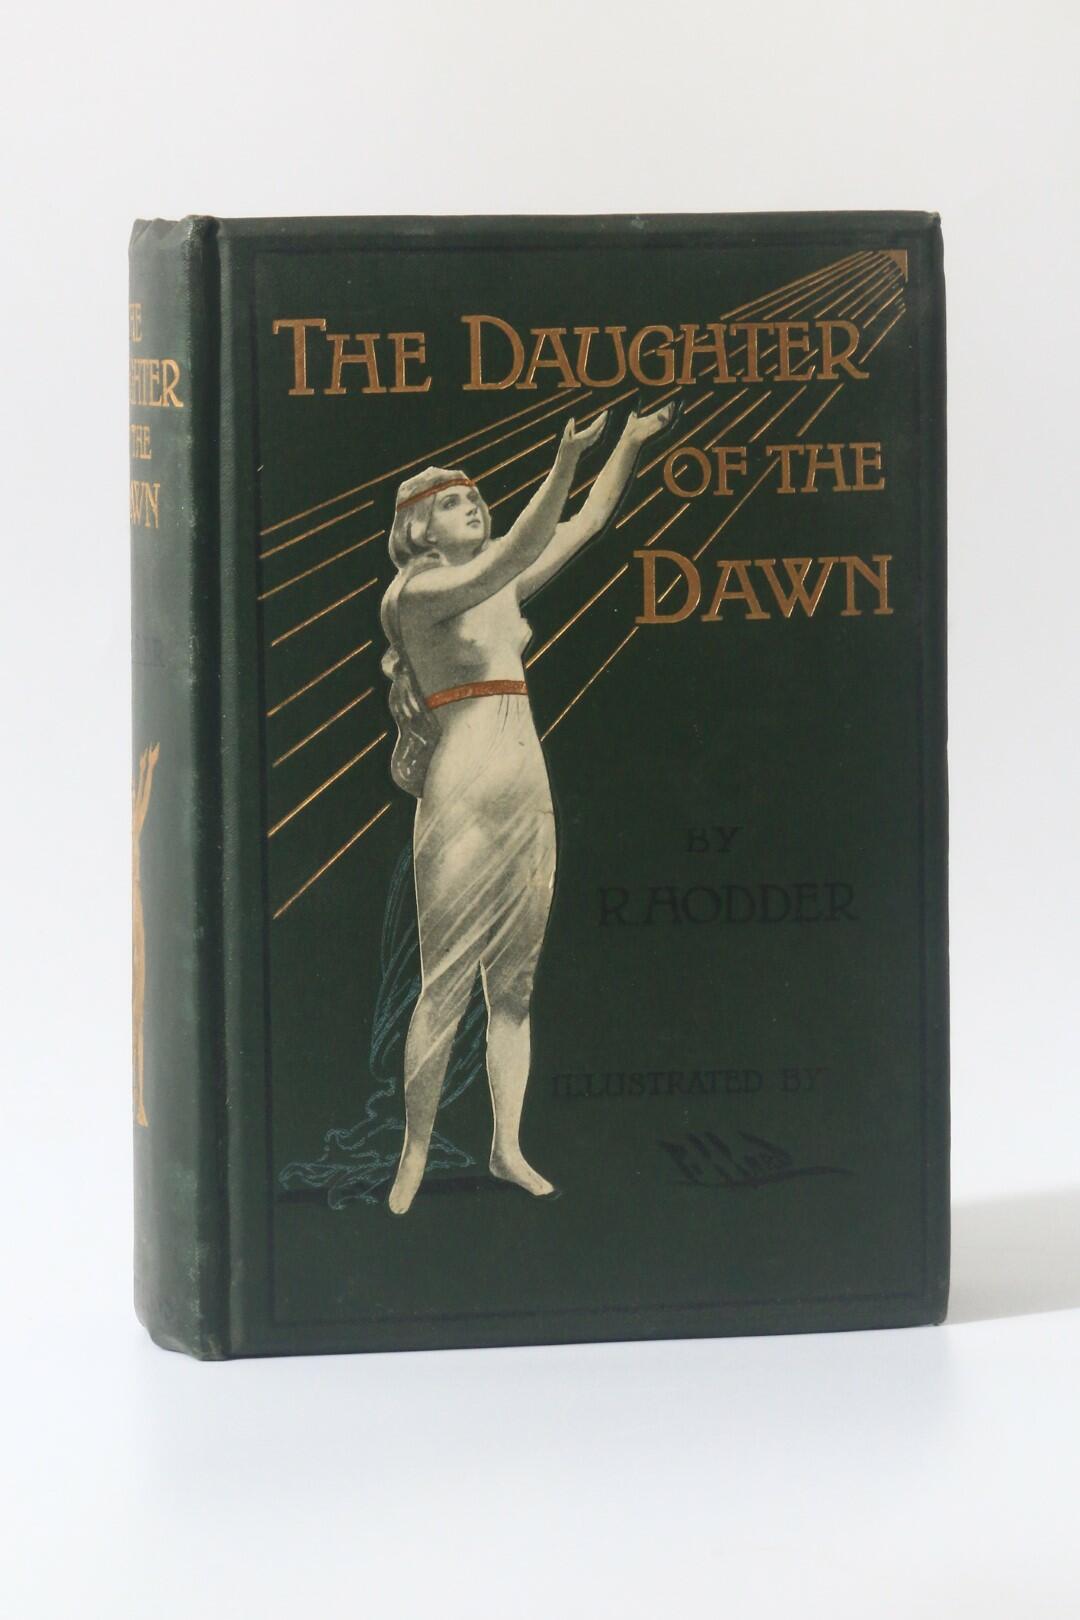 [William] R[eginald] Hodder - The Daughter of the Dawn: A Realistic Story of Maori Magic - Jarrolds & Co., 1903, First Edition.